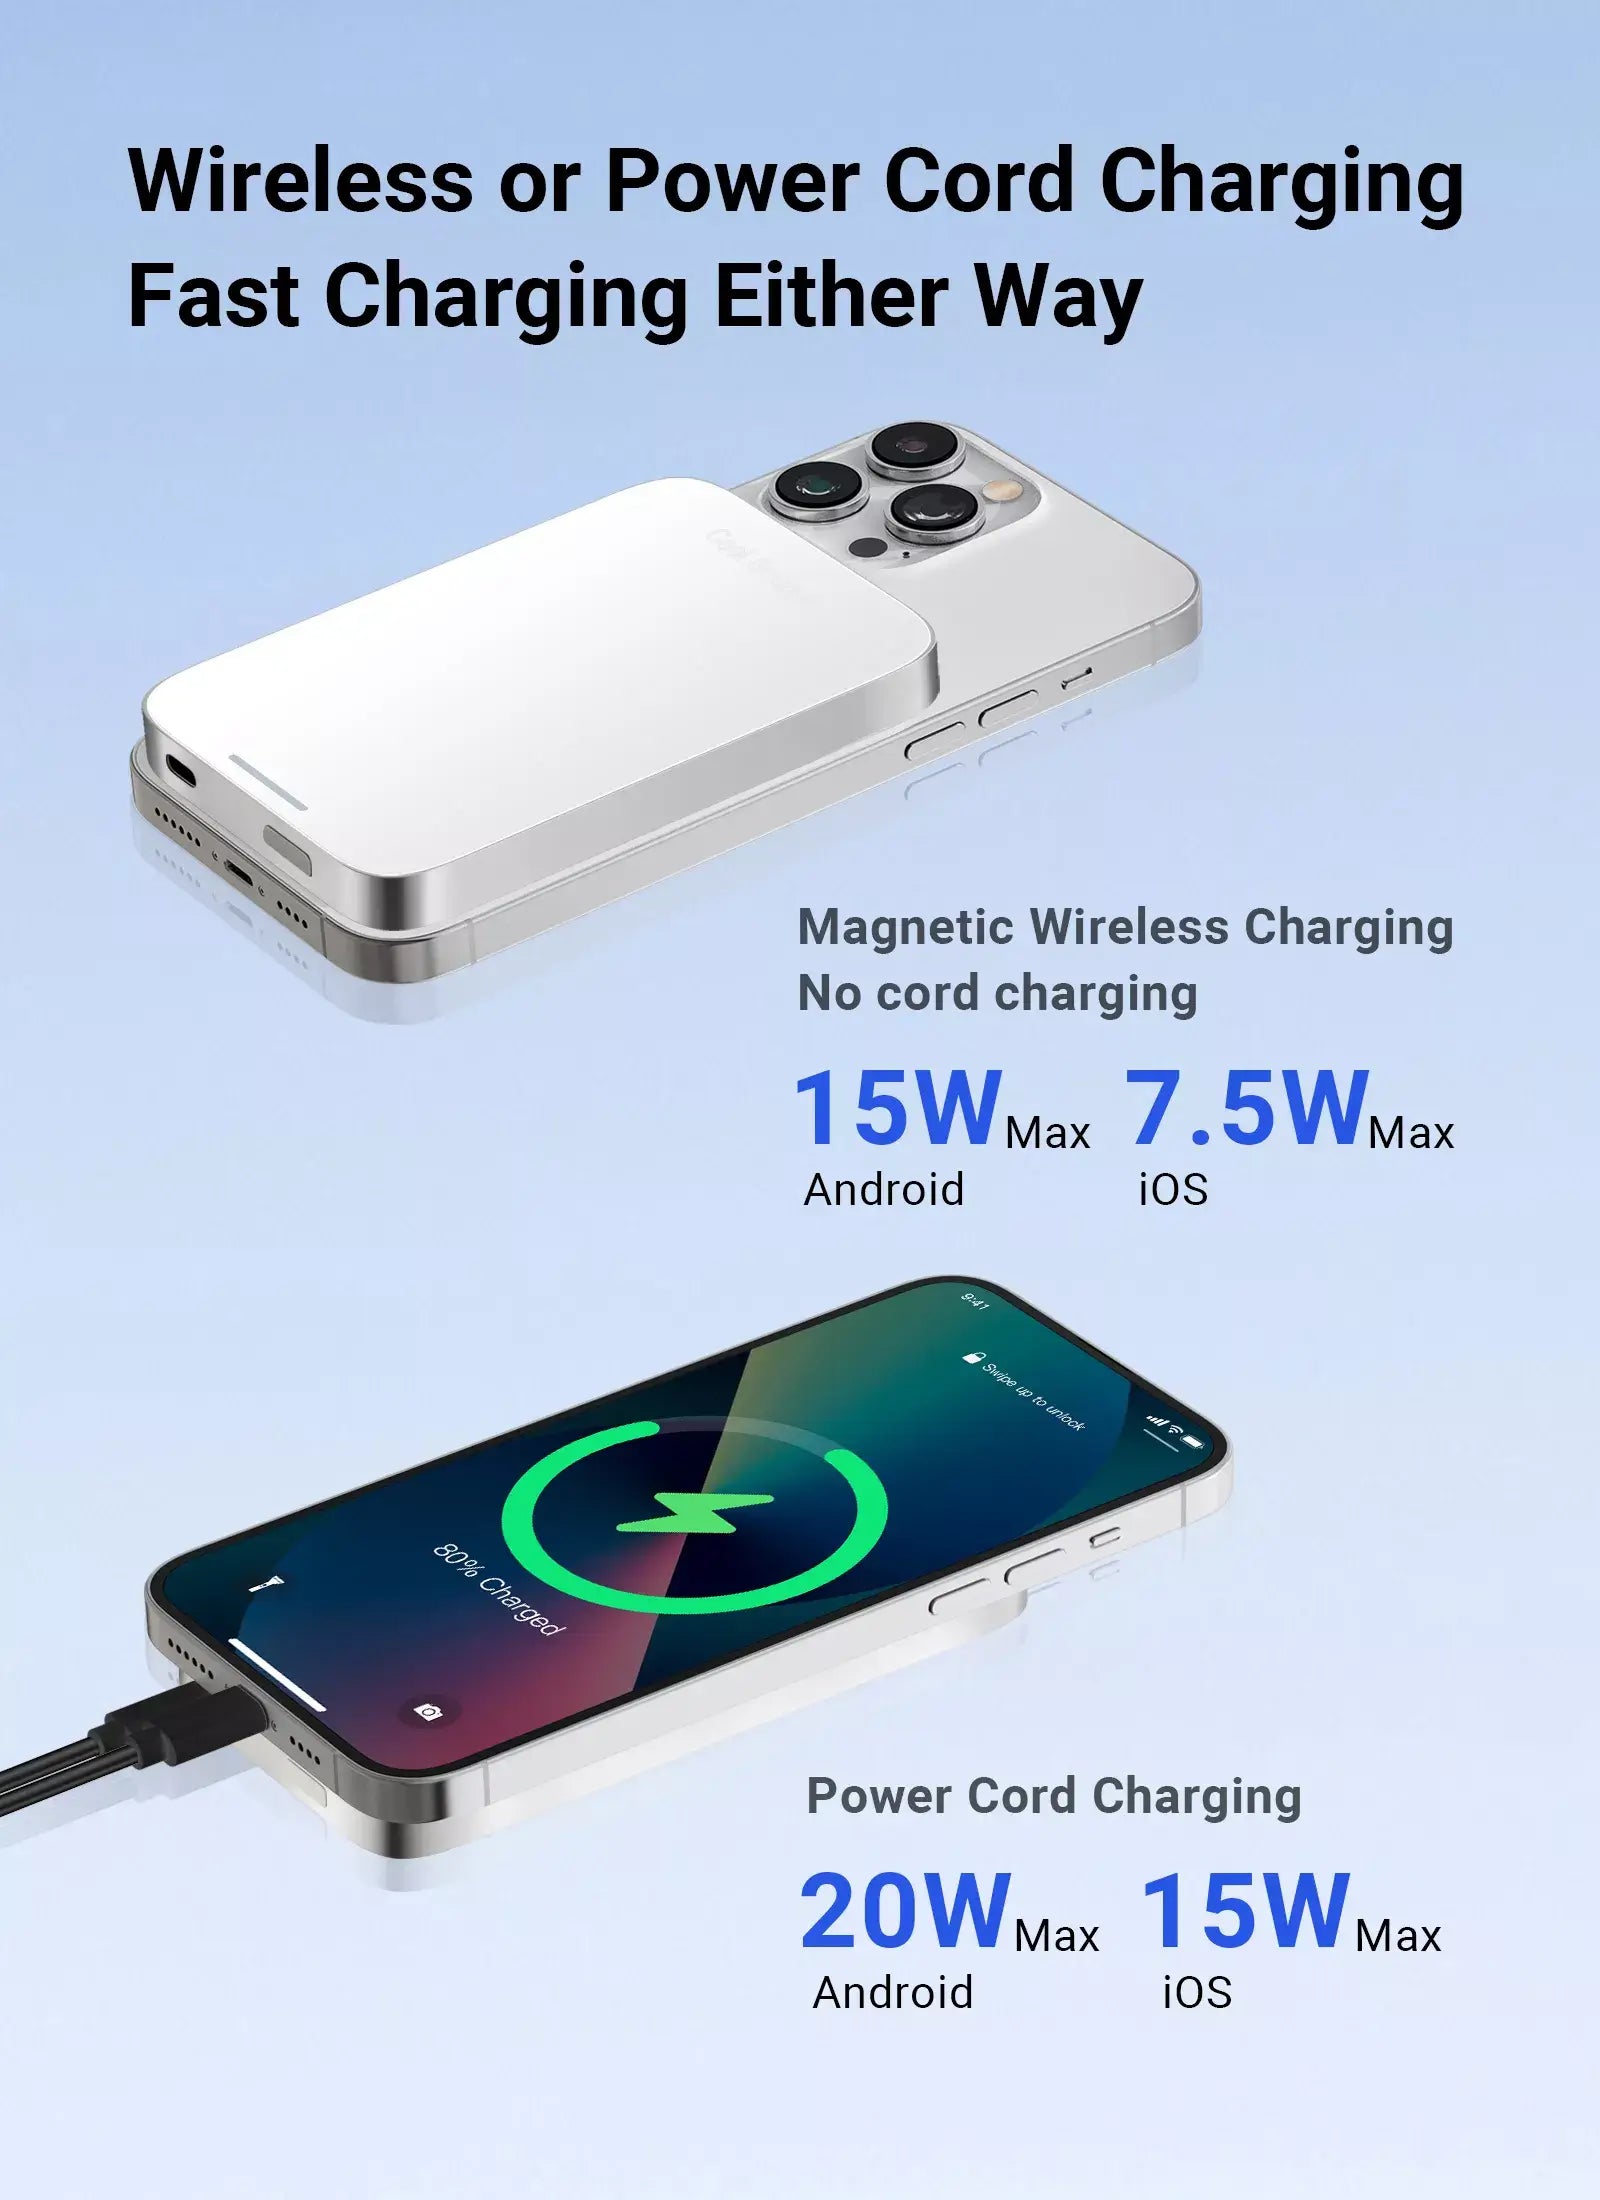 Wireless or Power Cord Charging